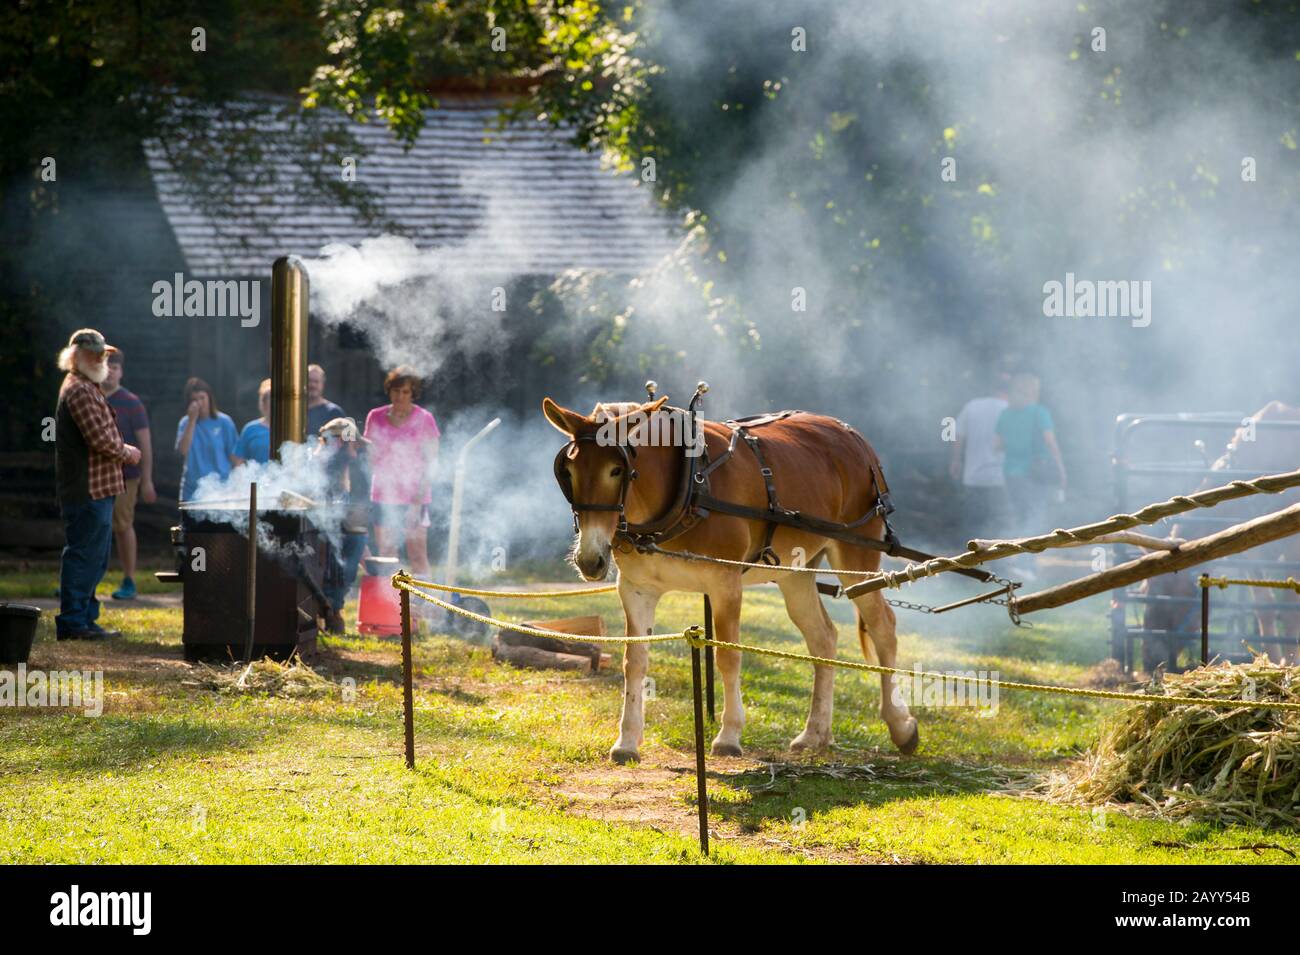 Historic reenactment at the John P. Cable Grist Mill in Cades Cove, Great Smoky Mountains National Park in Tennessee, USA. Stock Photo